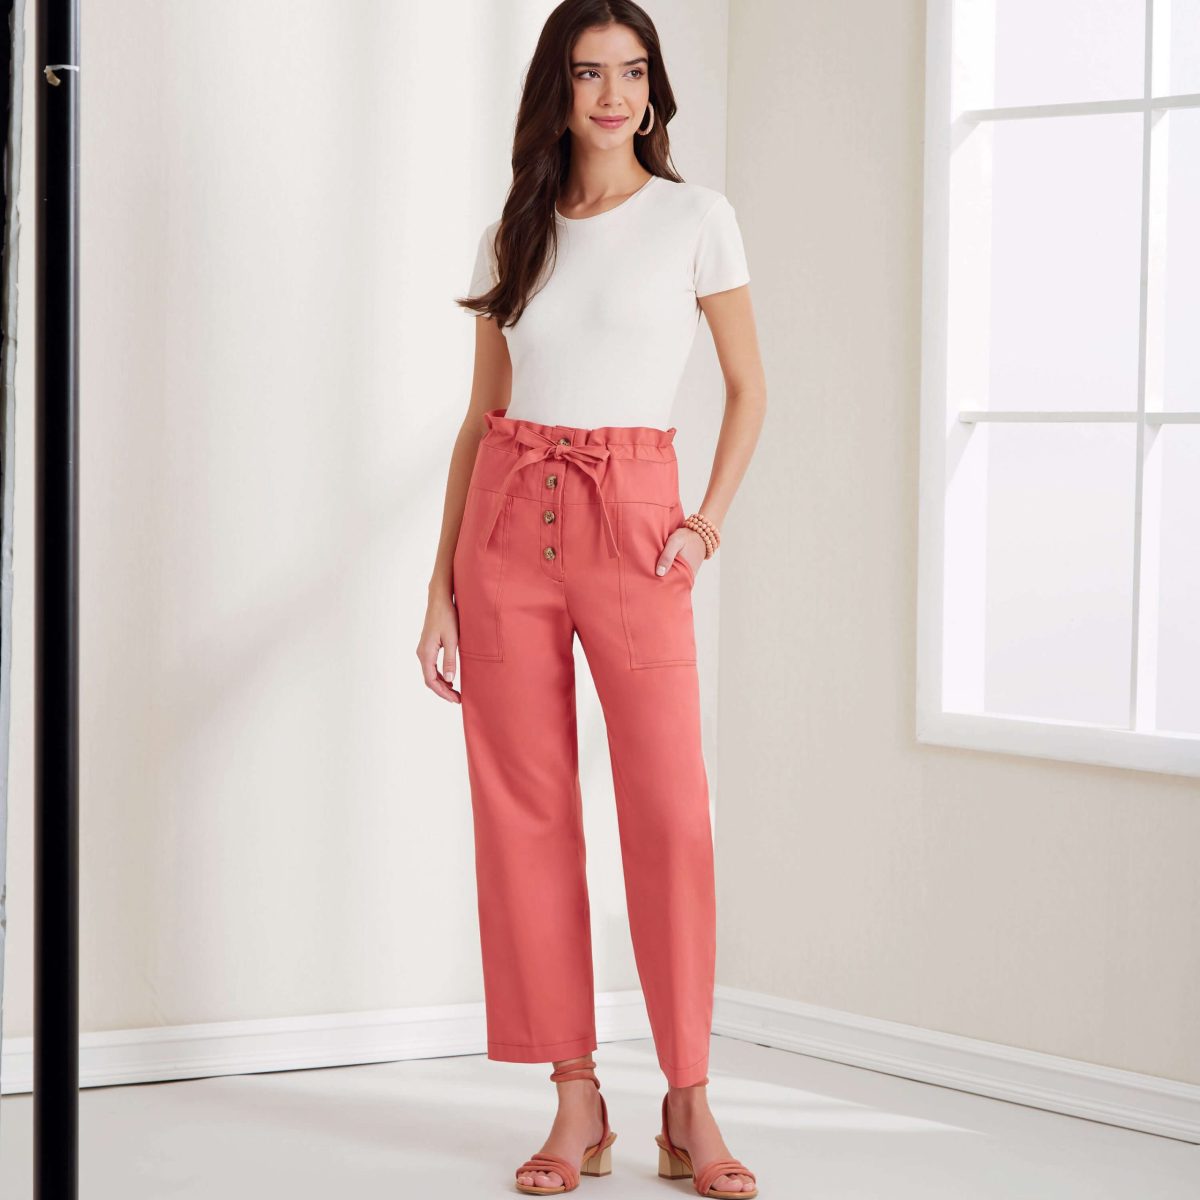 New Look Sewing Pattern N6674 Misses' Trousers & Shorts